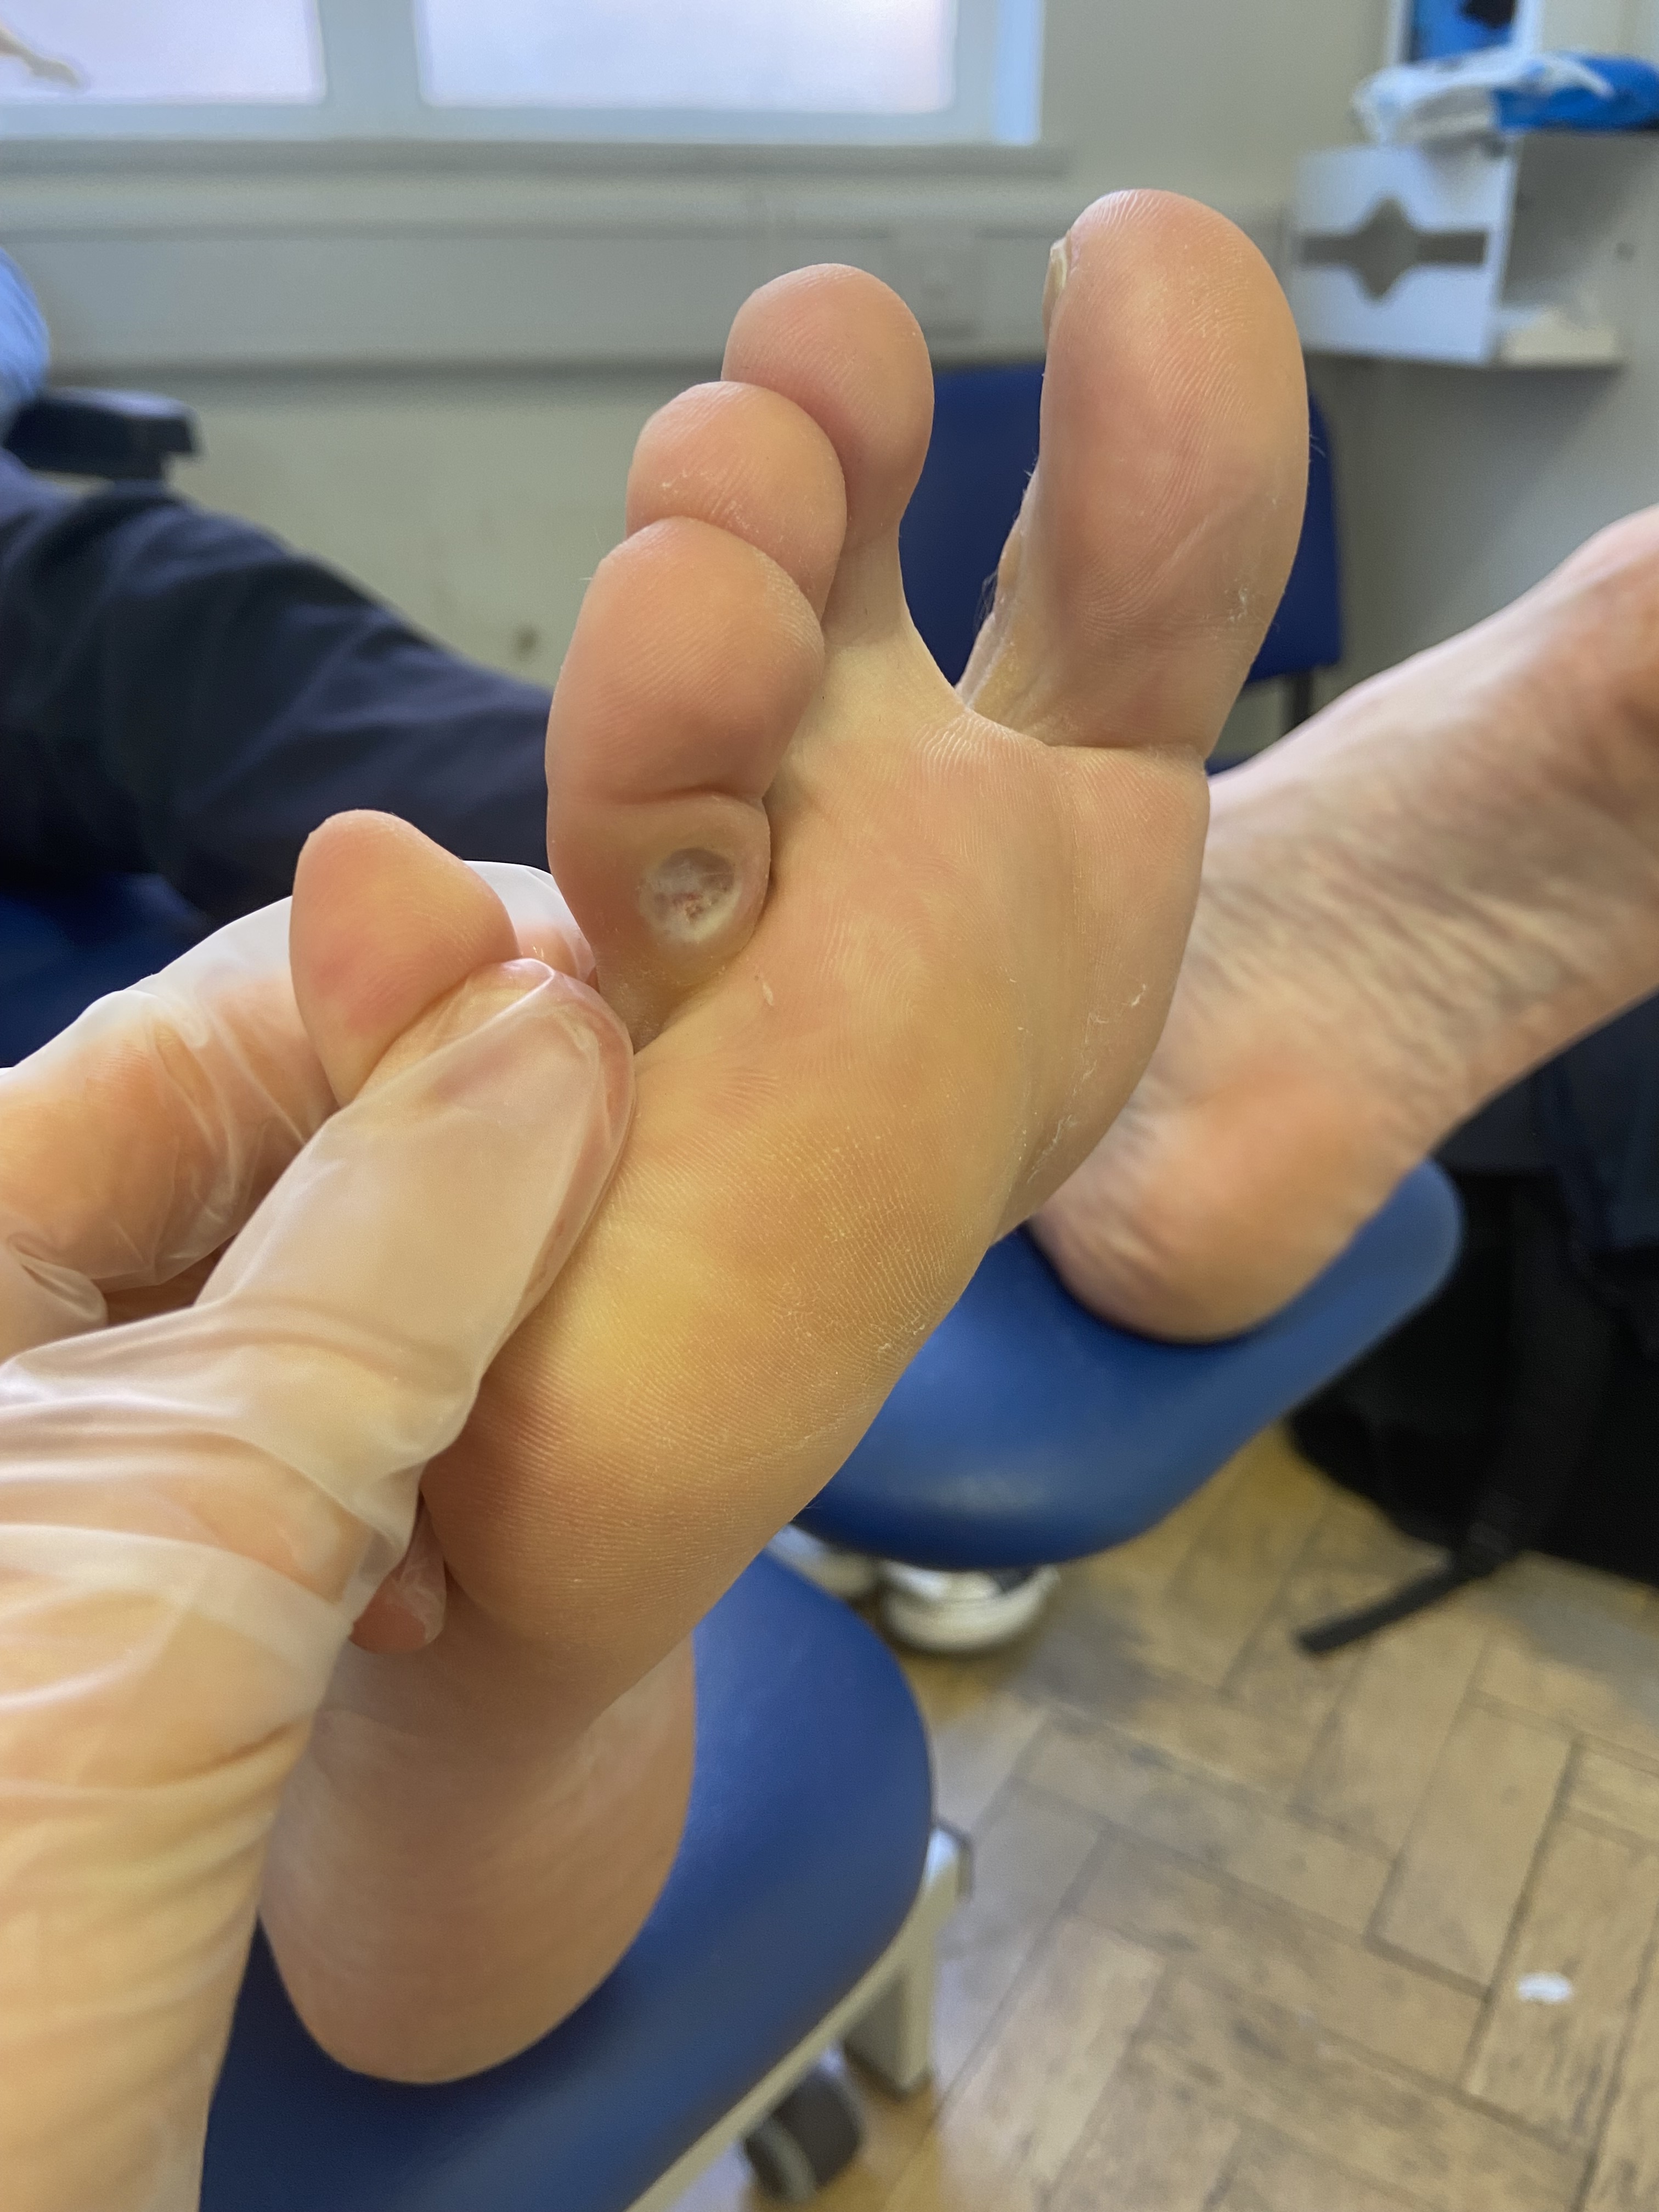 https://www.manchesterpodiatry.co.uk/images/content/before-and-after/corns/11b.jpg